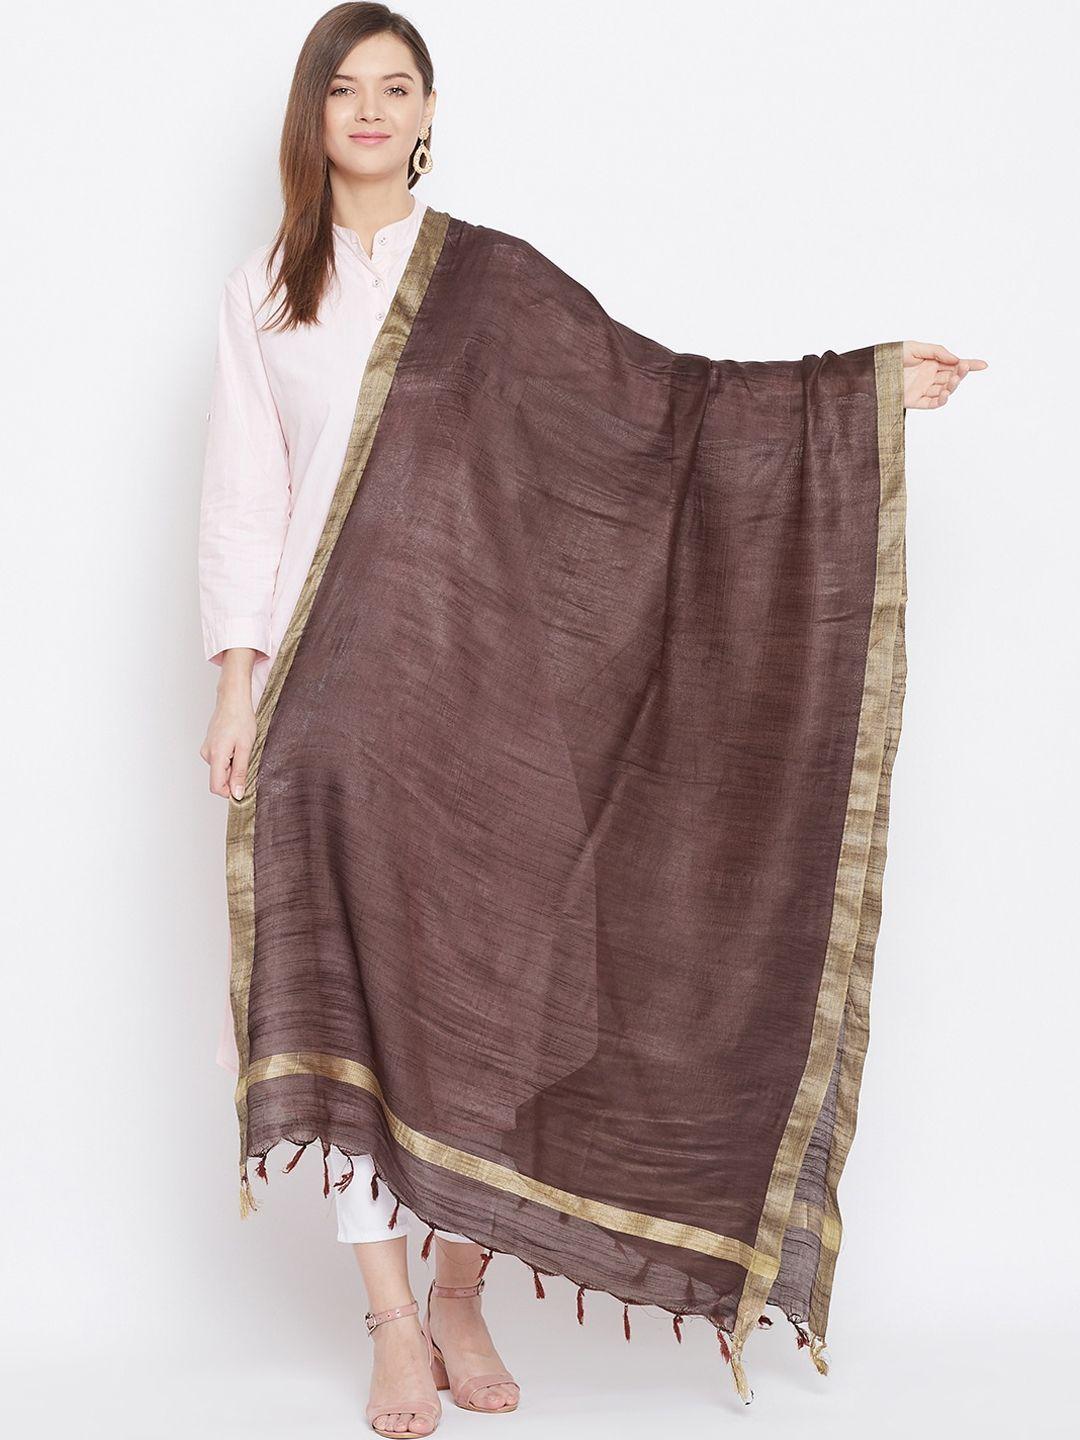 clora-creation-coffee-brown-&-gold-toned-solid-dupatta